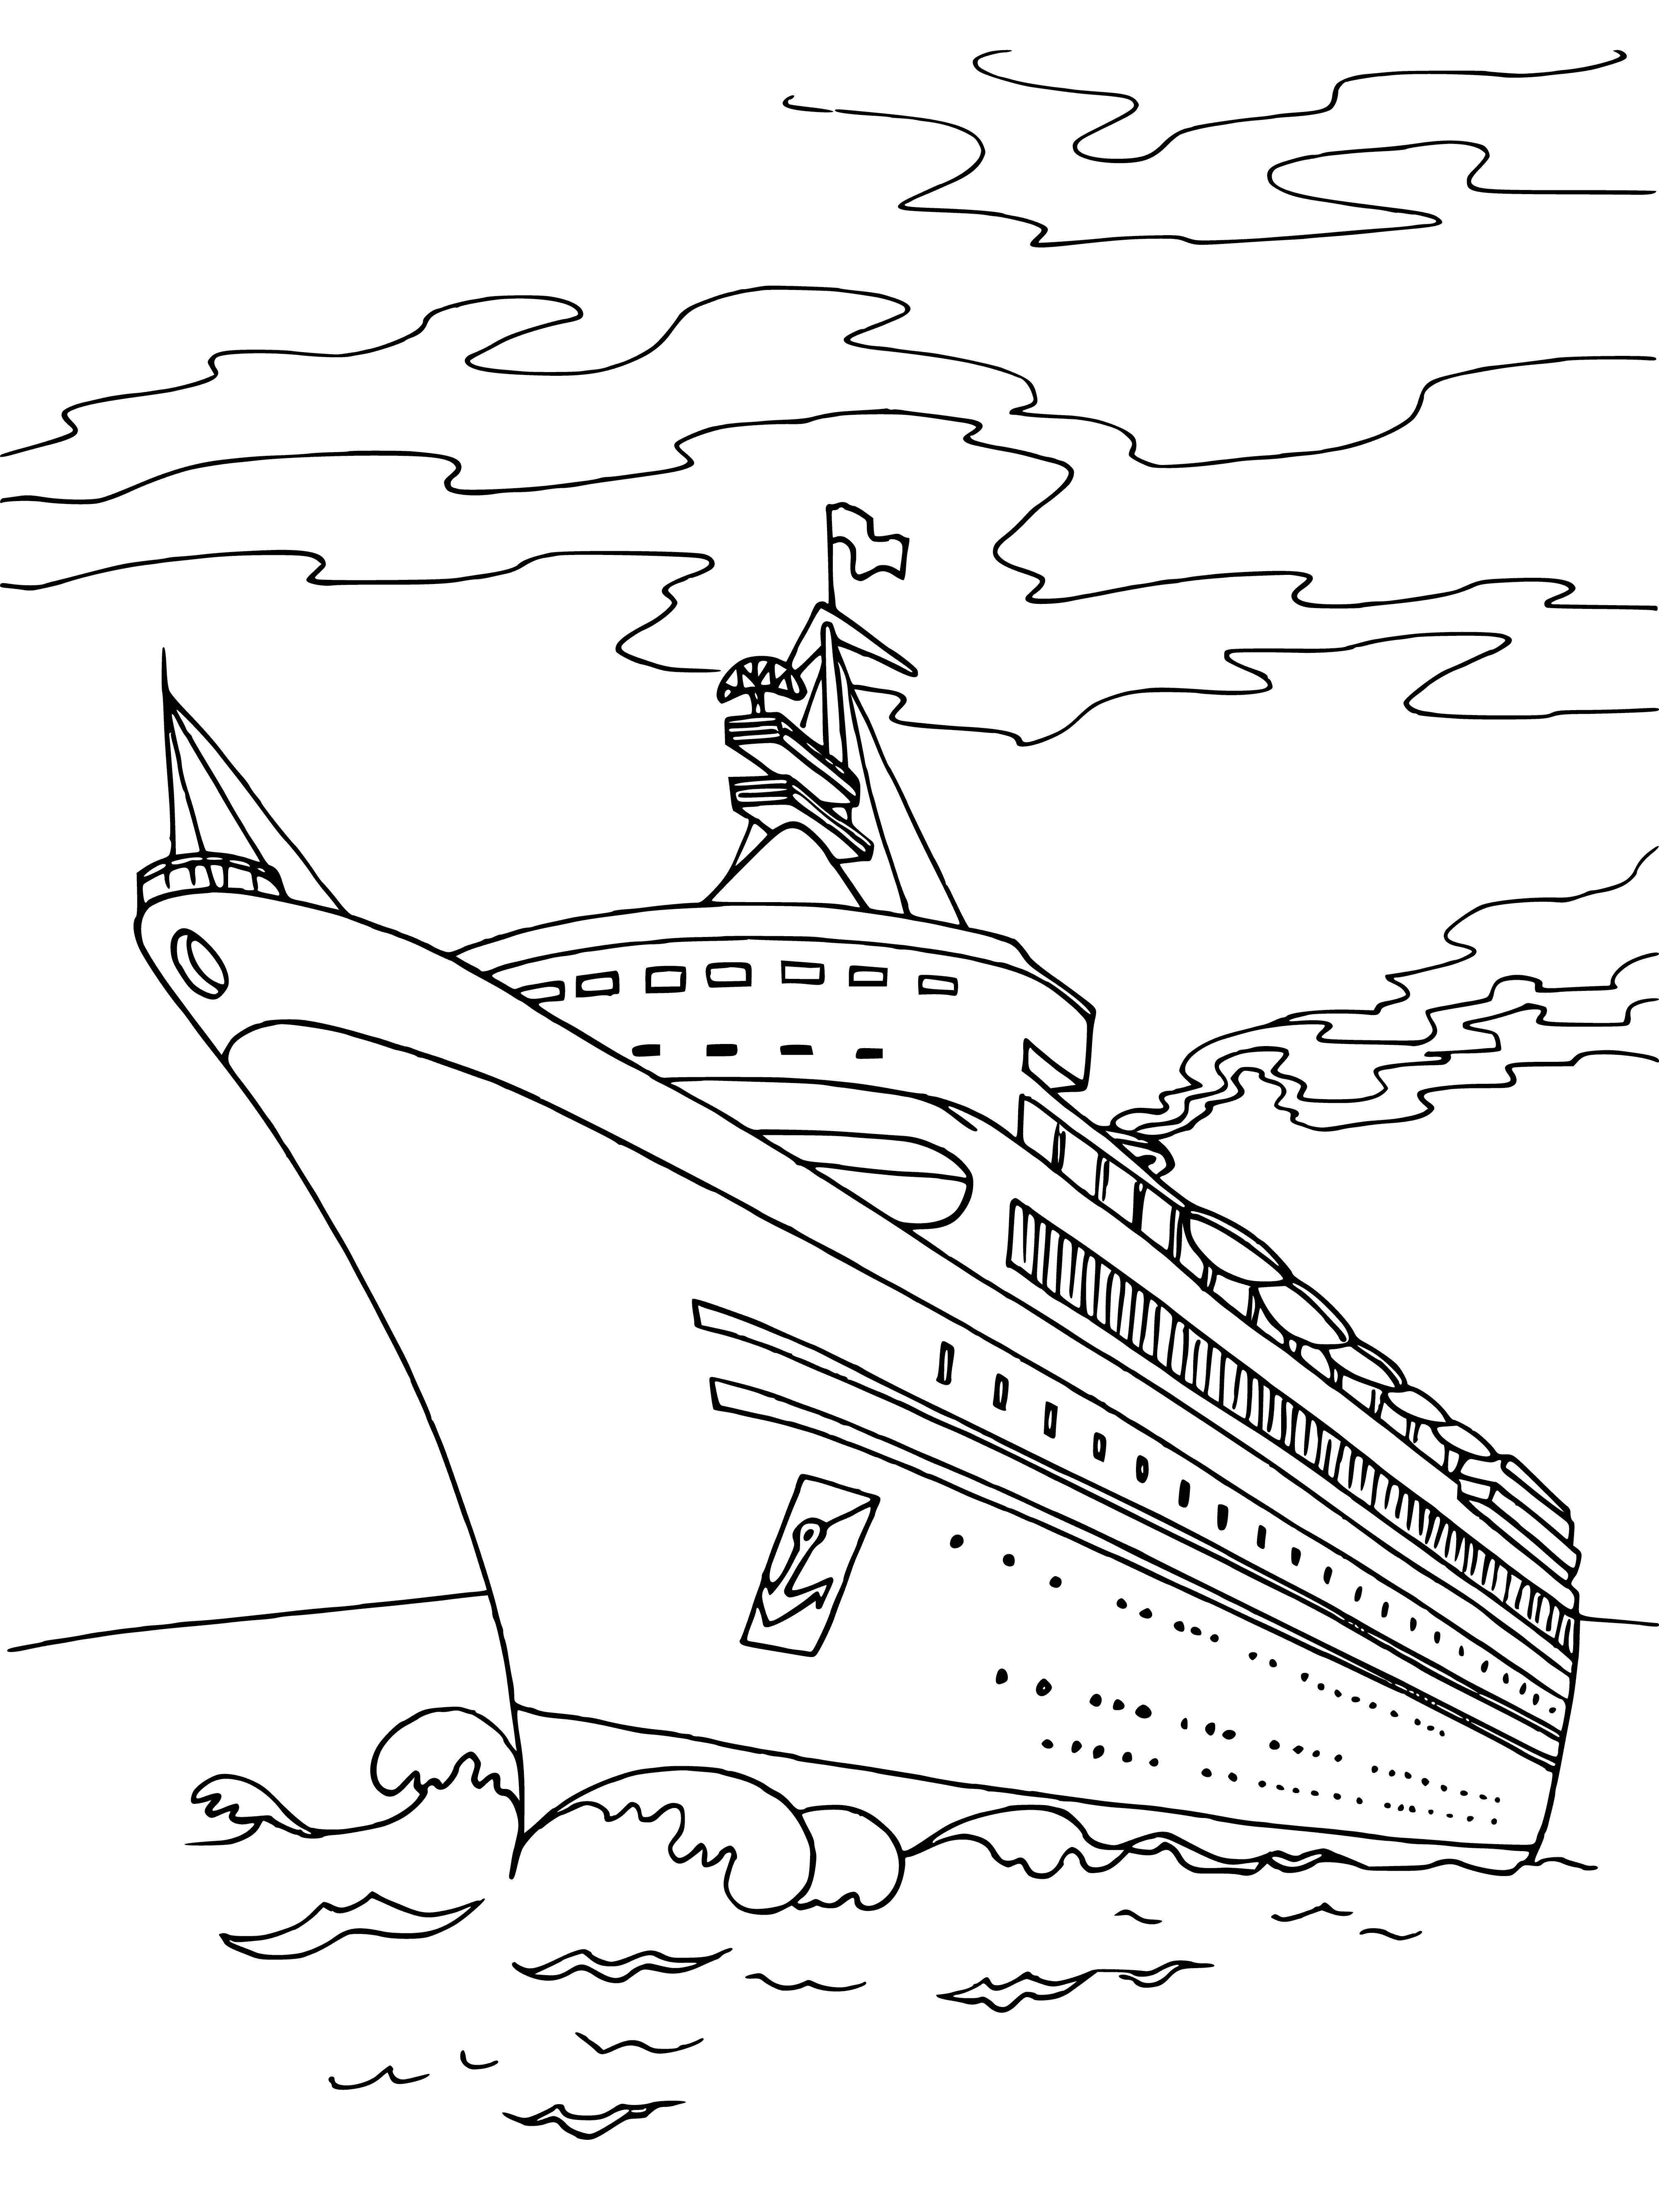 coloring page: Giant, multi-decked ship w/ many windows & tall chimneys, large white sails & smaller ones, flag w/ unknown emblem, decorated w/ lifeboats.